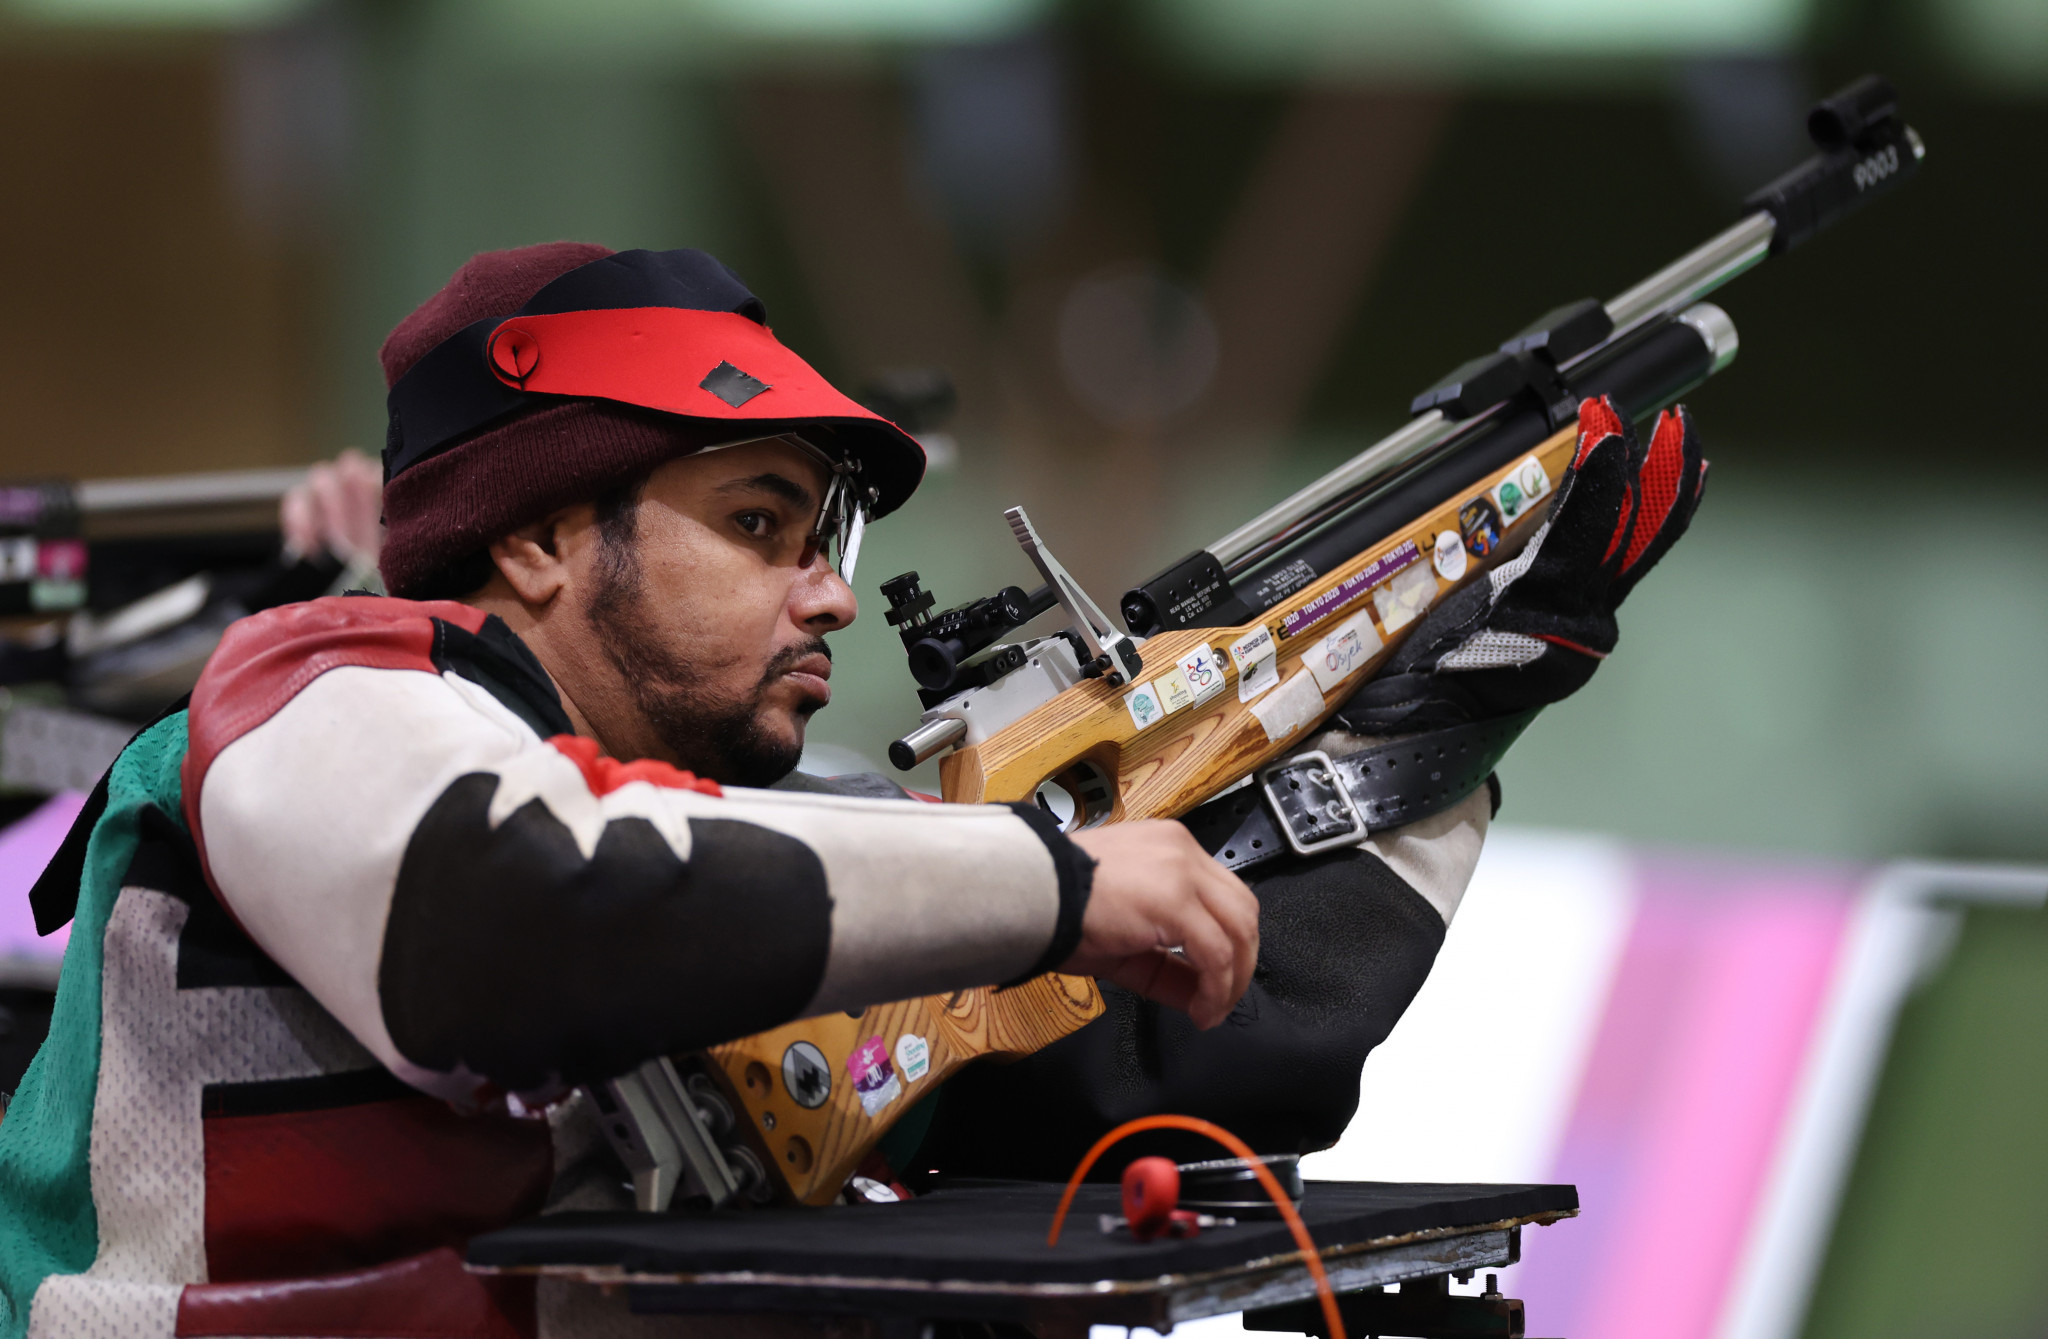 Paralympic champions shooting for Paris 2024 quotas in Al Ain